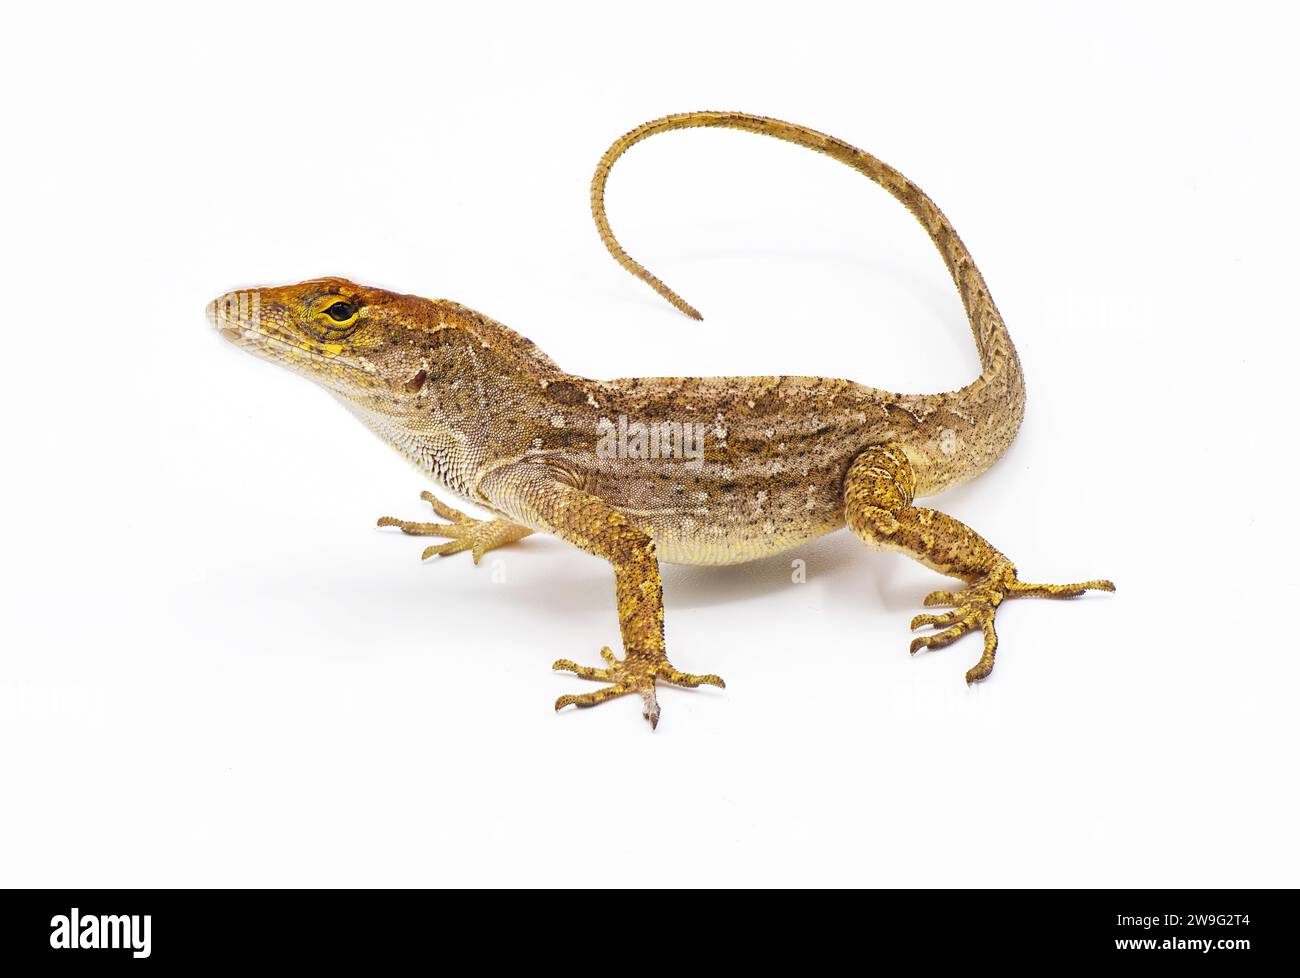 Cuban brown anole, Bahaman or De la Sagras anole - Anolis sagrei - side front view looking at camera. isolated on white background, detail throughout Stock Photo